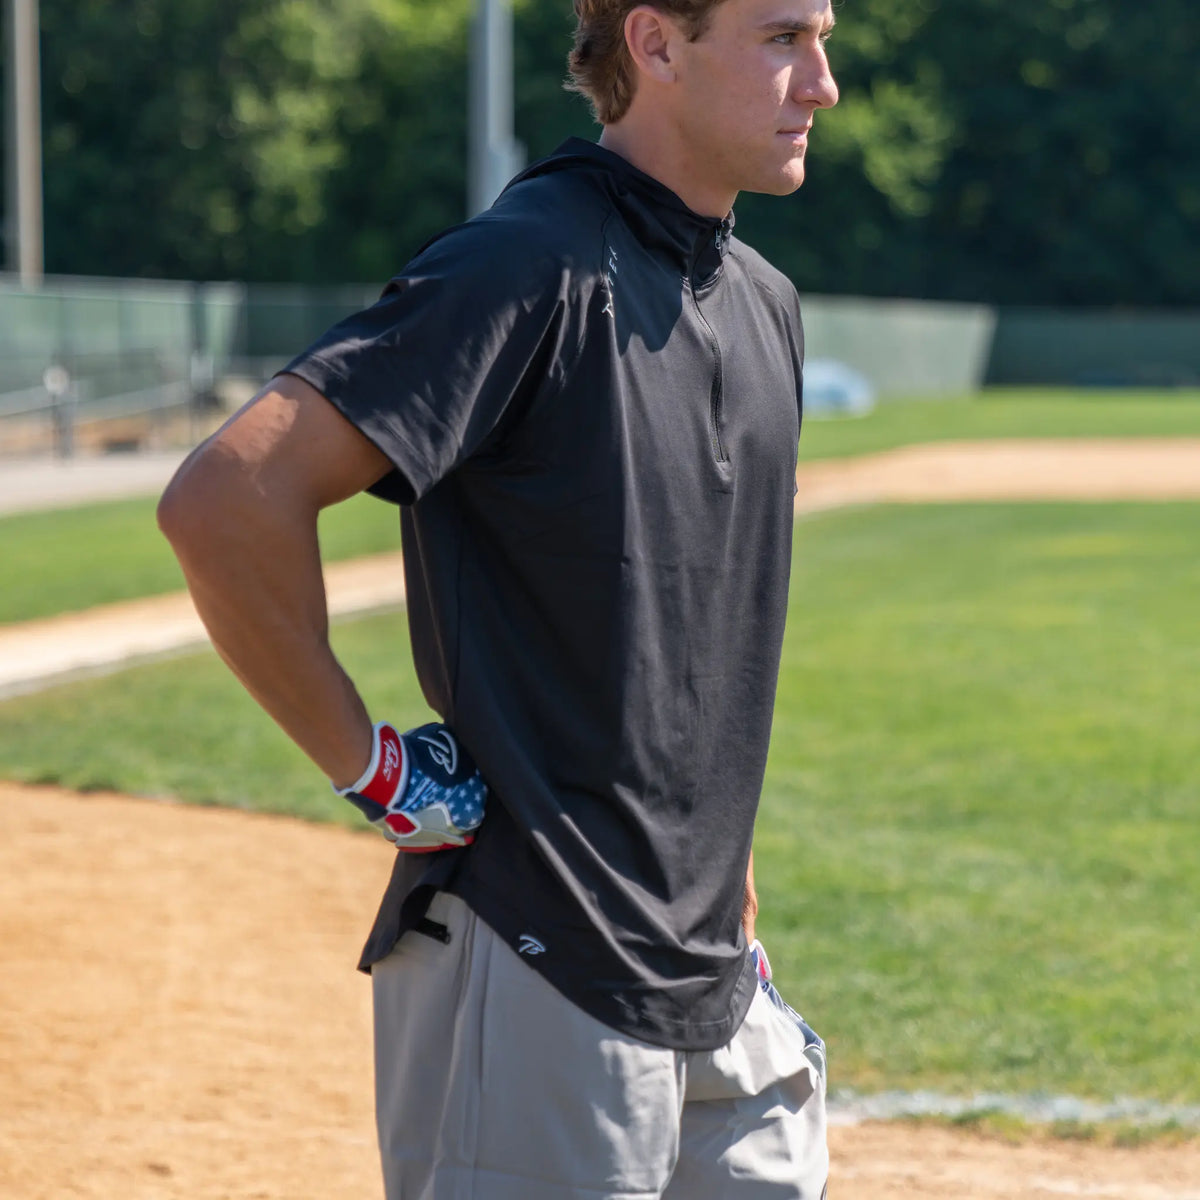 Baseball player in a reflective pose wearing a black short-sleeve hoodie and white baseball pants, equipped with a batting glove, contemplating his next turn at bat on a sunny field.